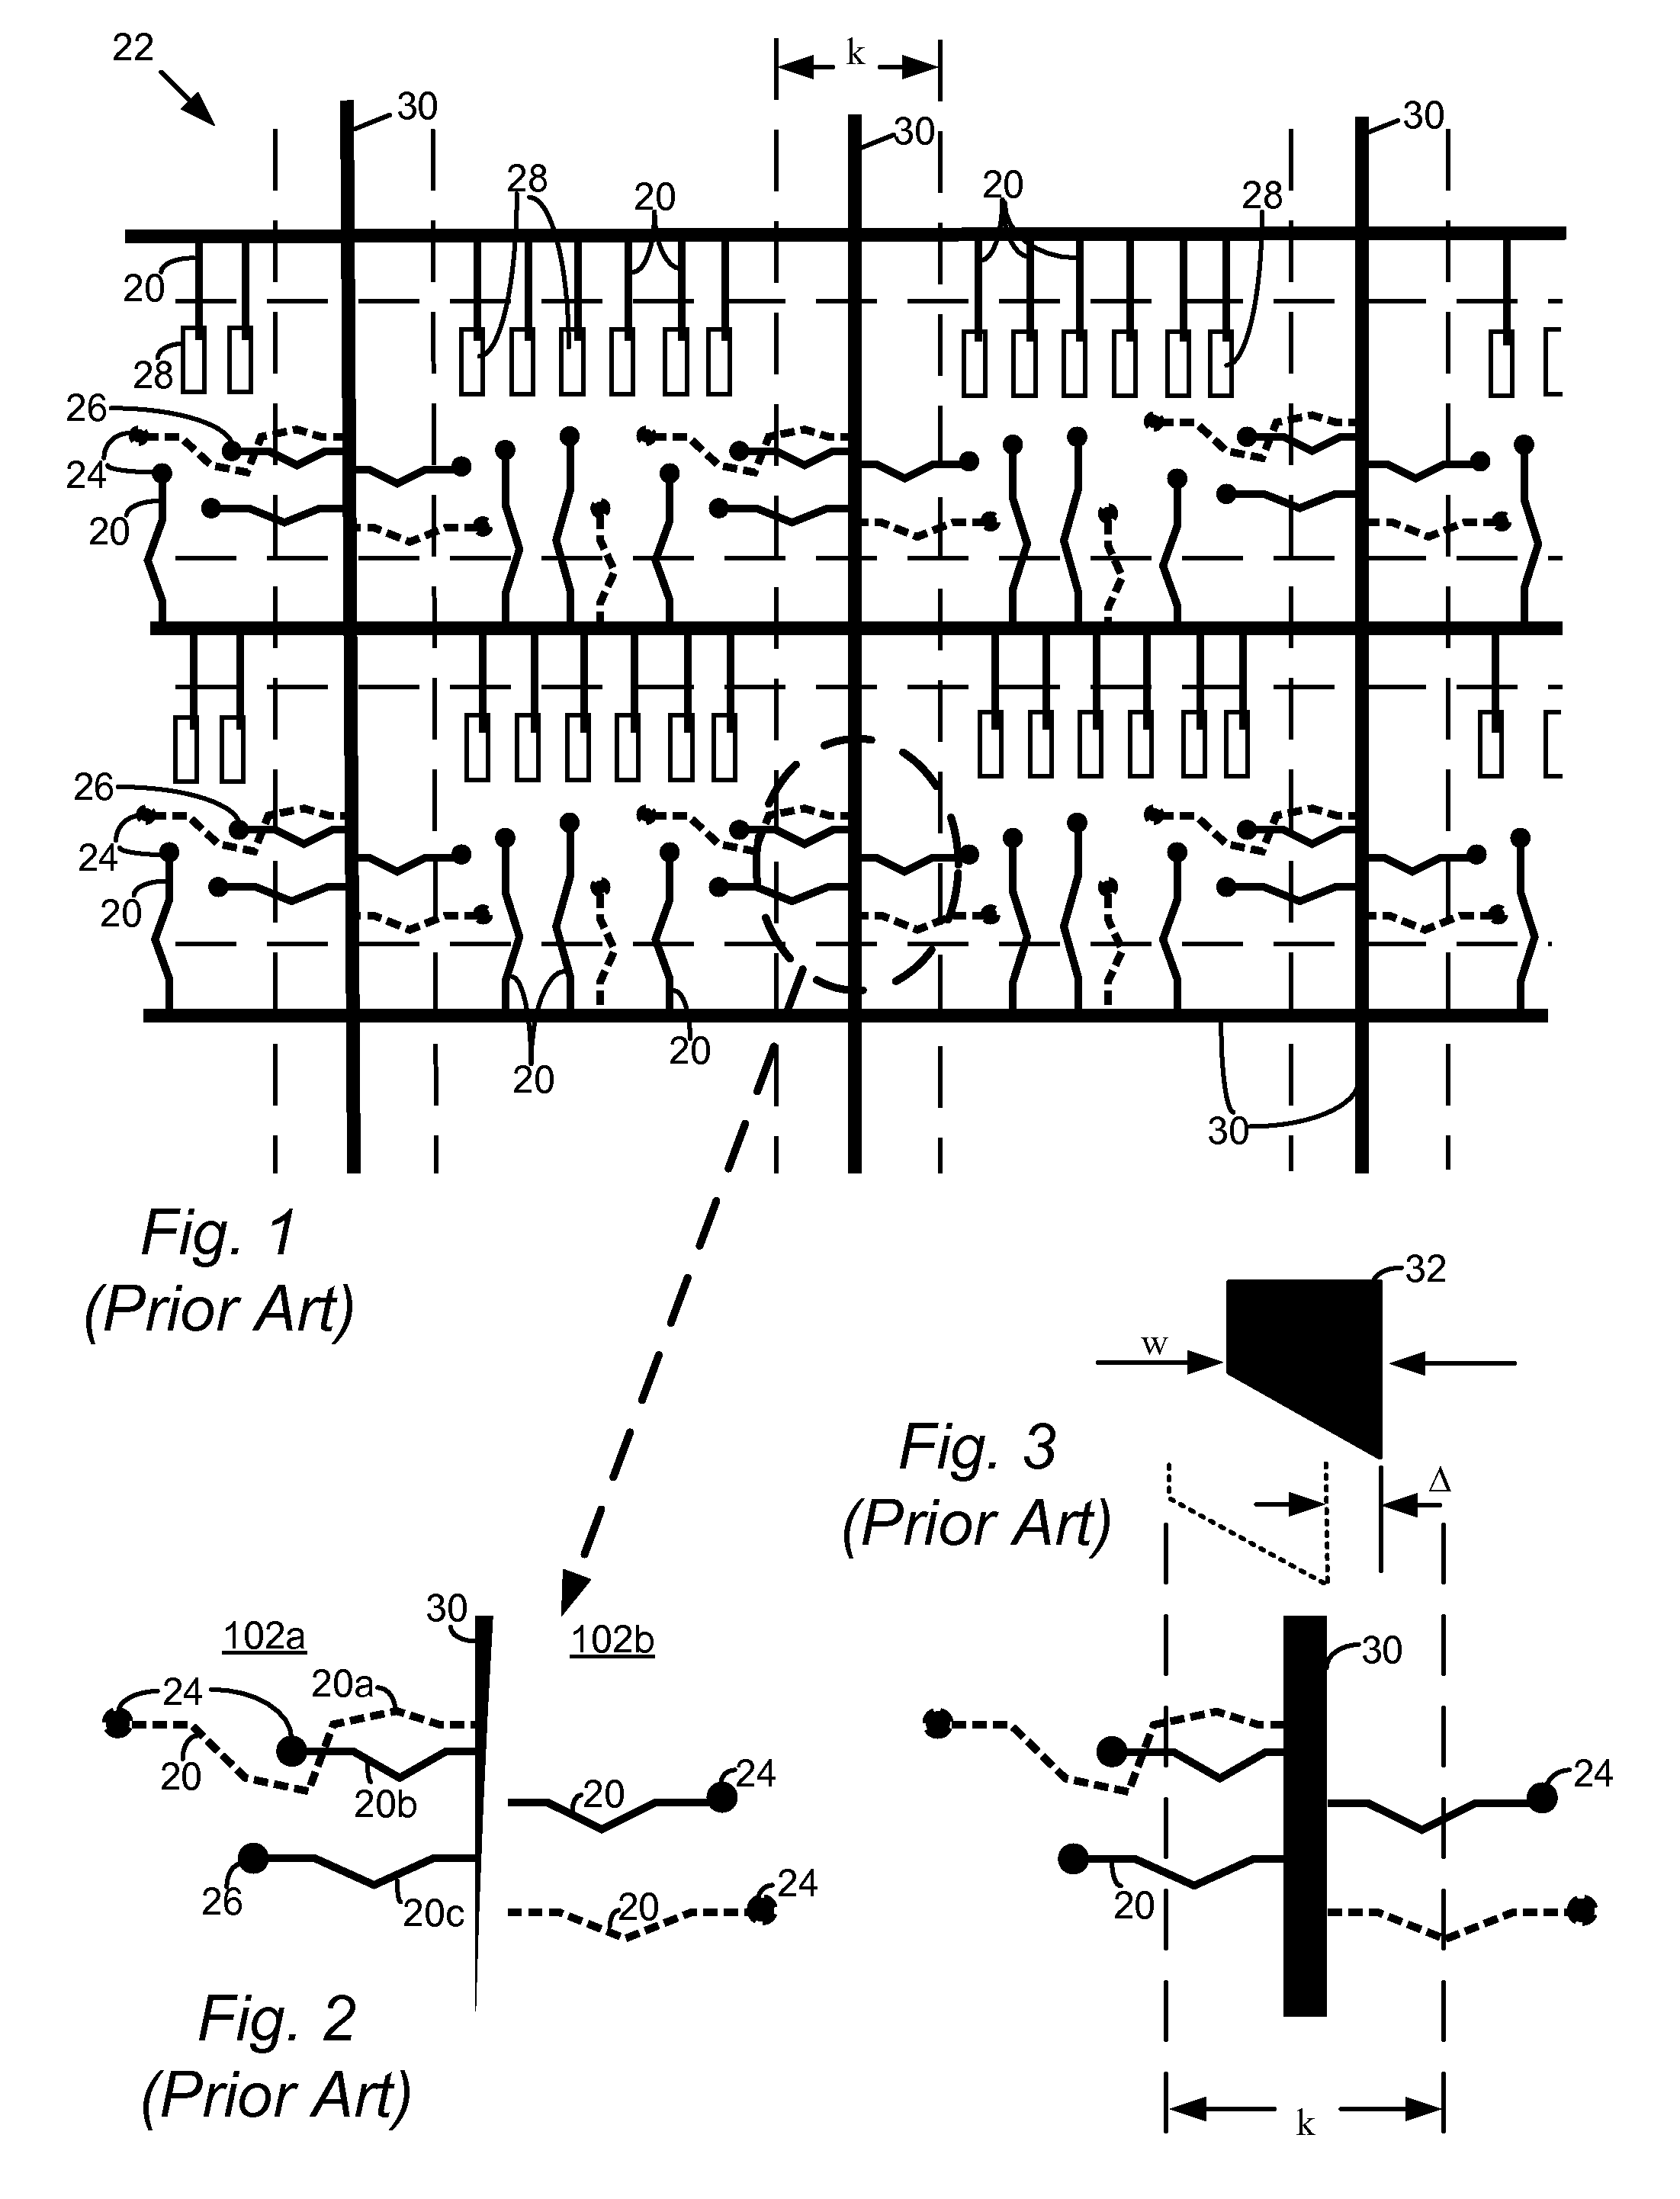 Two-sided substrate lead connection for minimizing kerf width on a semiconductor substrate panel